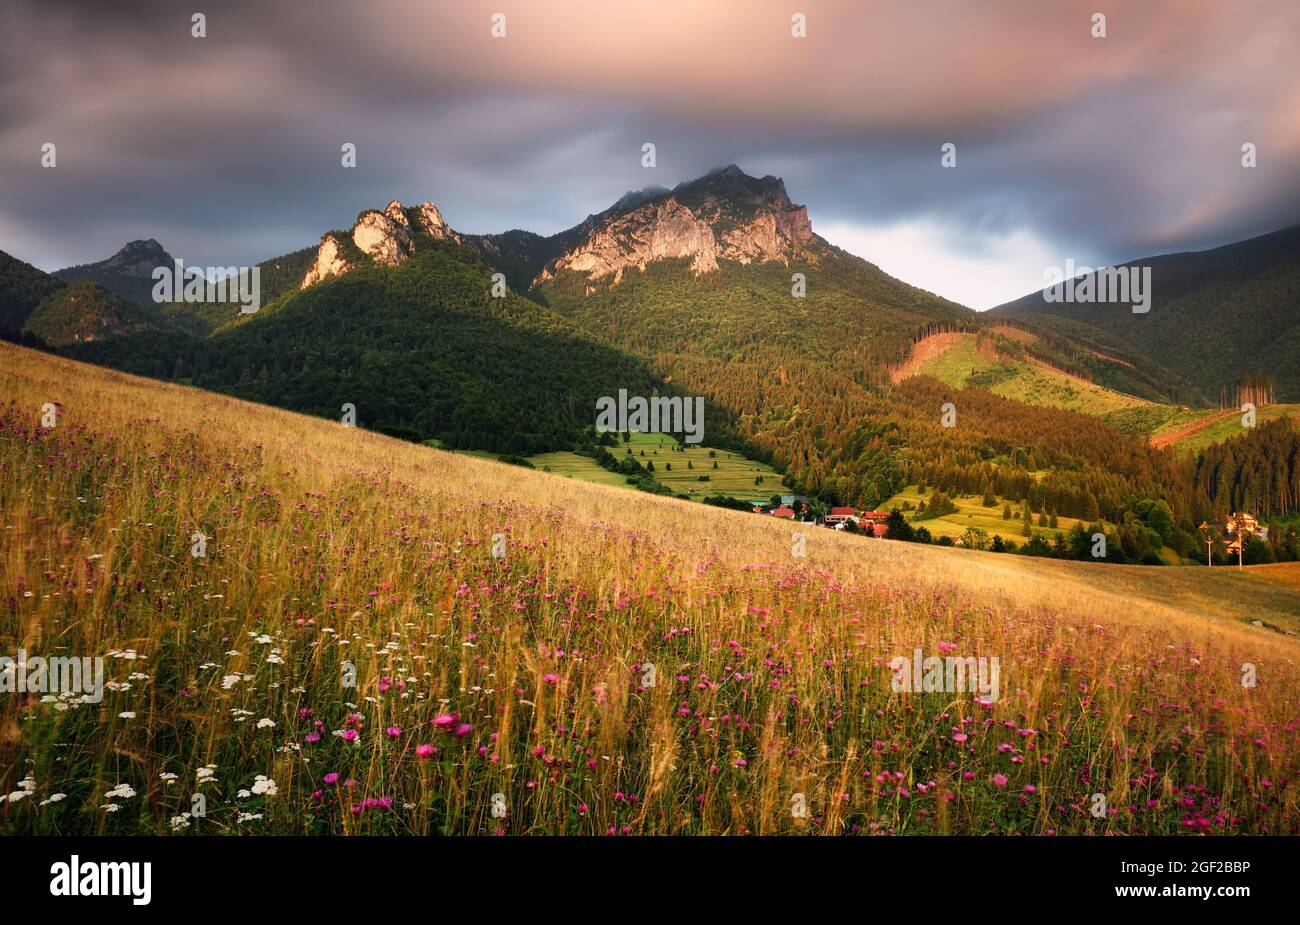 Mountain landscape with wild flowers meadow - Long exposure Stock Photo